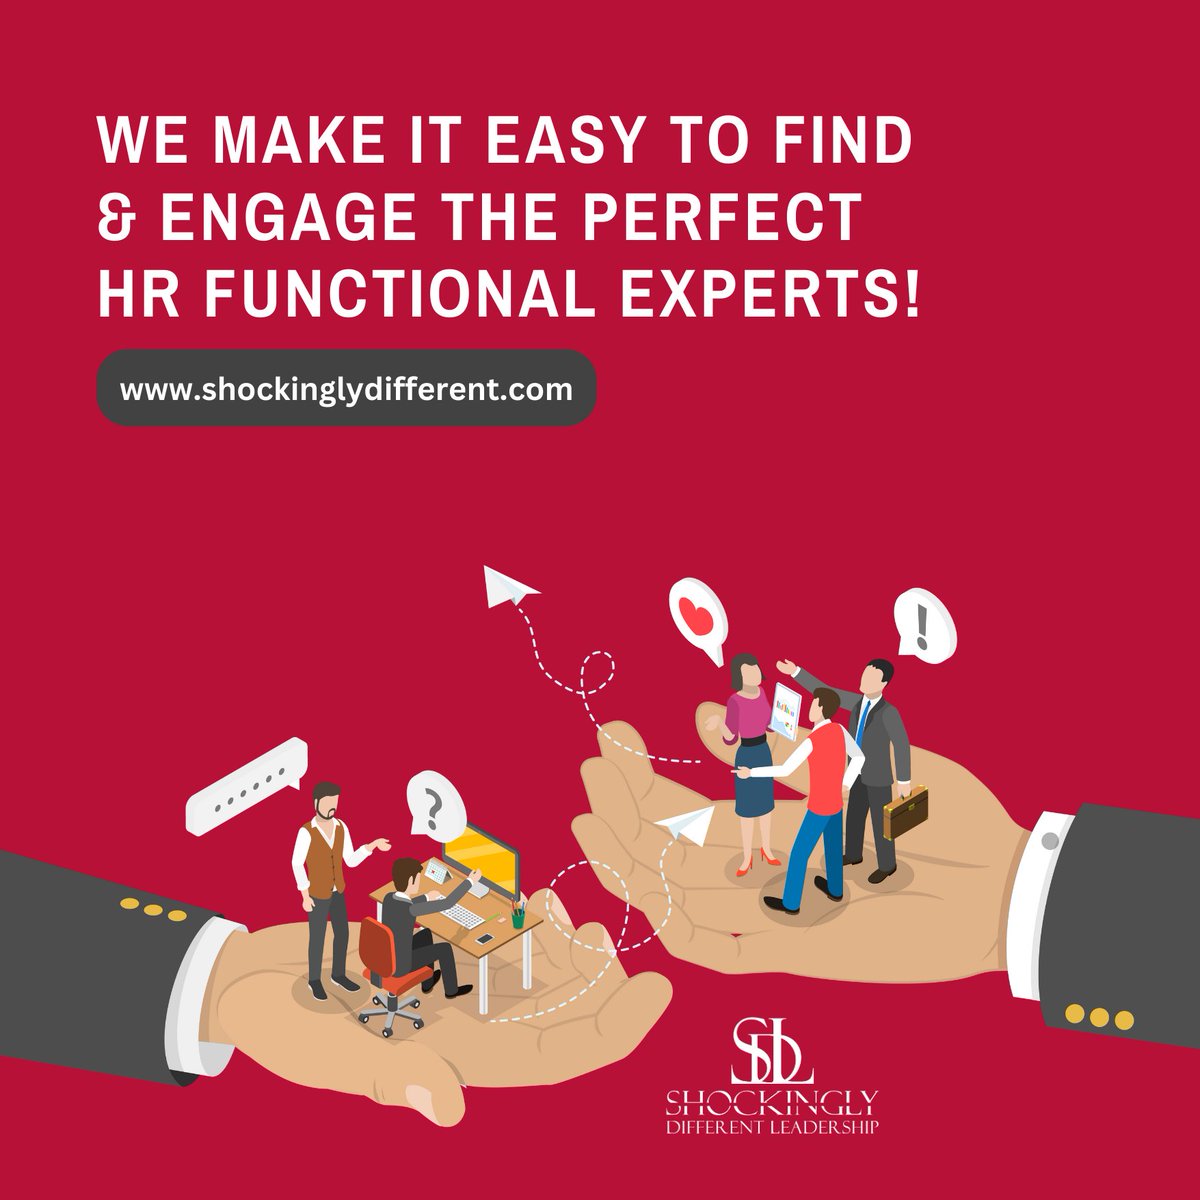 At Shockingly Different Leadership, we specialize in connecting you with the perfect #HRprofessionals to meet your needs - 𝐅𝐀𝐒𝐓. 🔥

𝐕𝐢𝐬𝐢𝐭 𝐨𝐮𝐫 𝐰𝐞𝐛𝐬𝐢𝐭𝐞 𝐭𝐨𝐝𝐚𝐲! bit.ly/3vbbSaL

#TalentDevelopment #OrganizationalChange